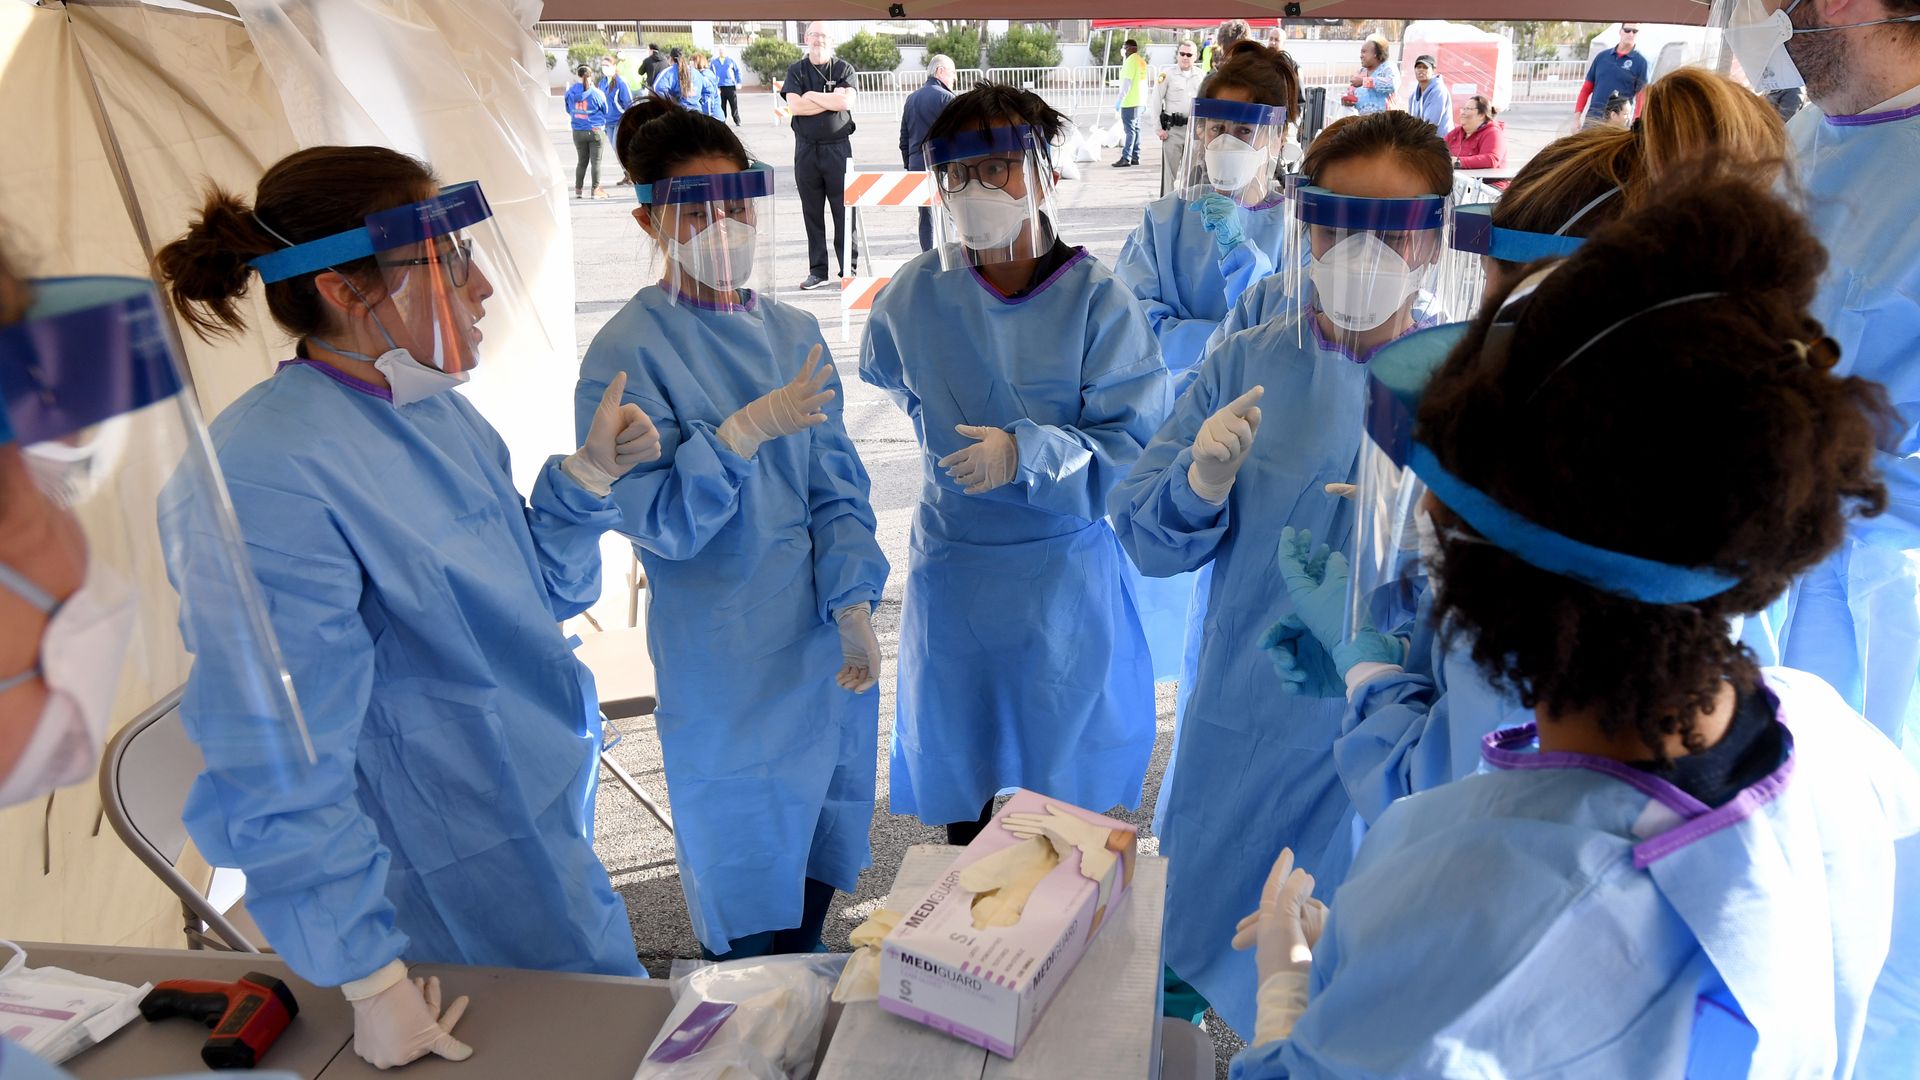 Medical workers dressed in blue gowns and face masks stand in a tent, ready to test people for coronavirus.